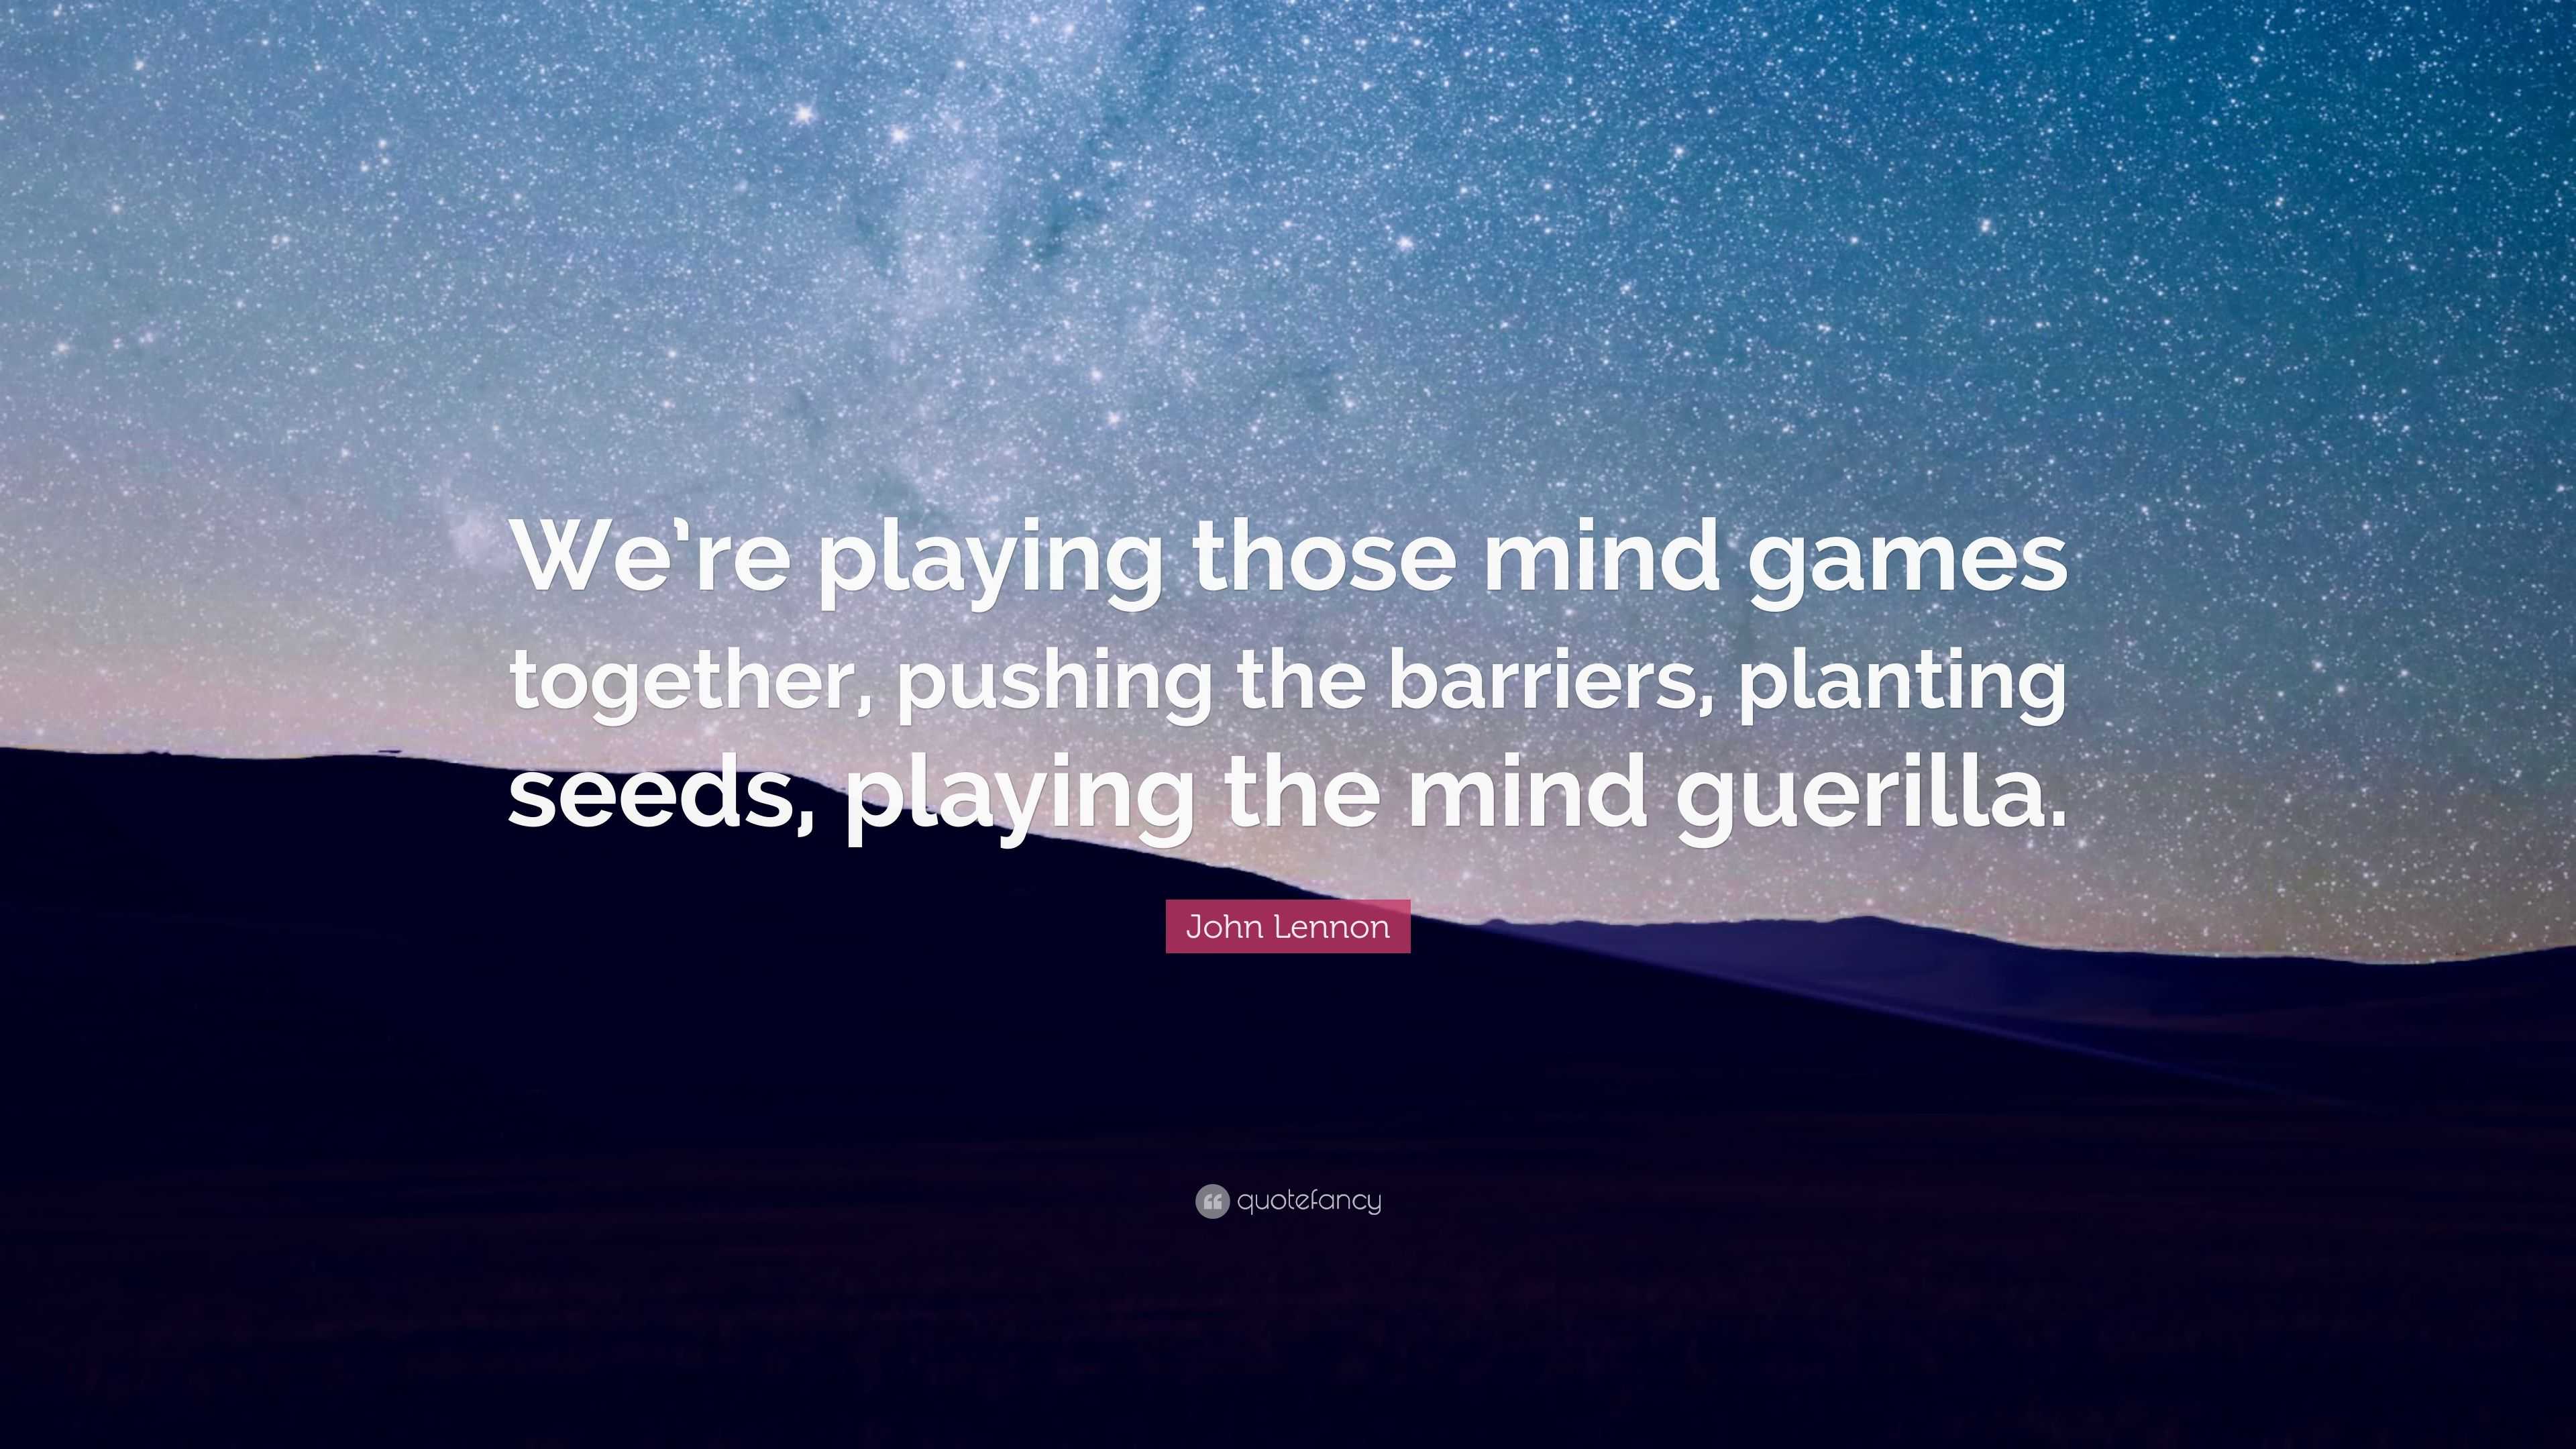 John Lennon Quote: “We're playing those mind games together